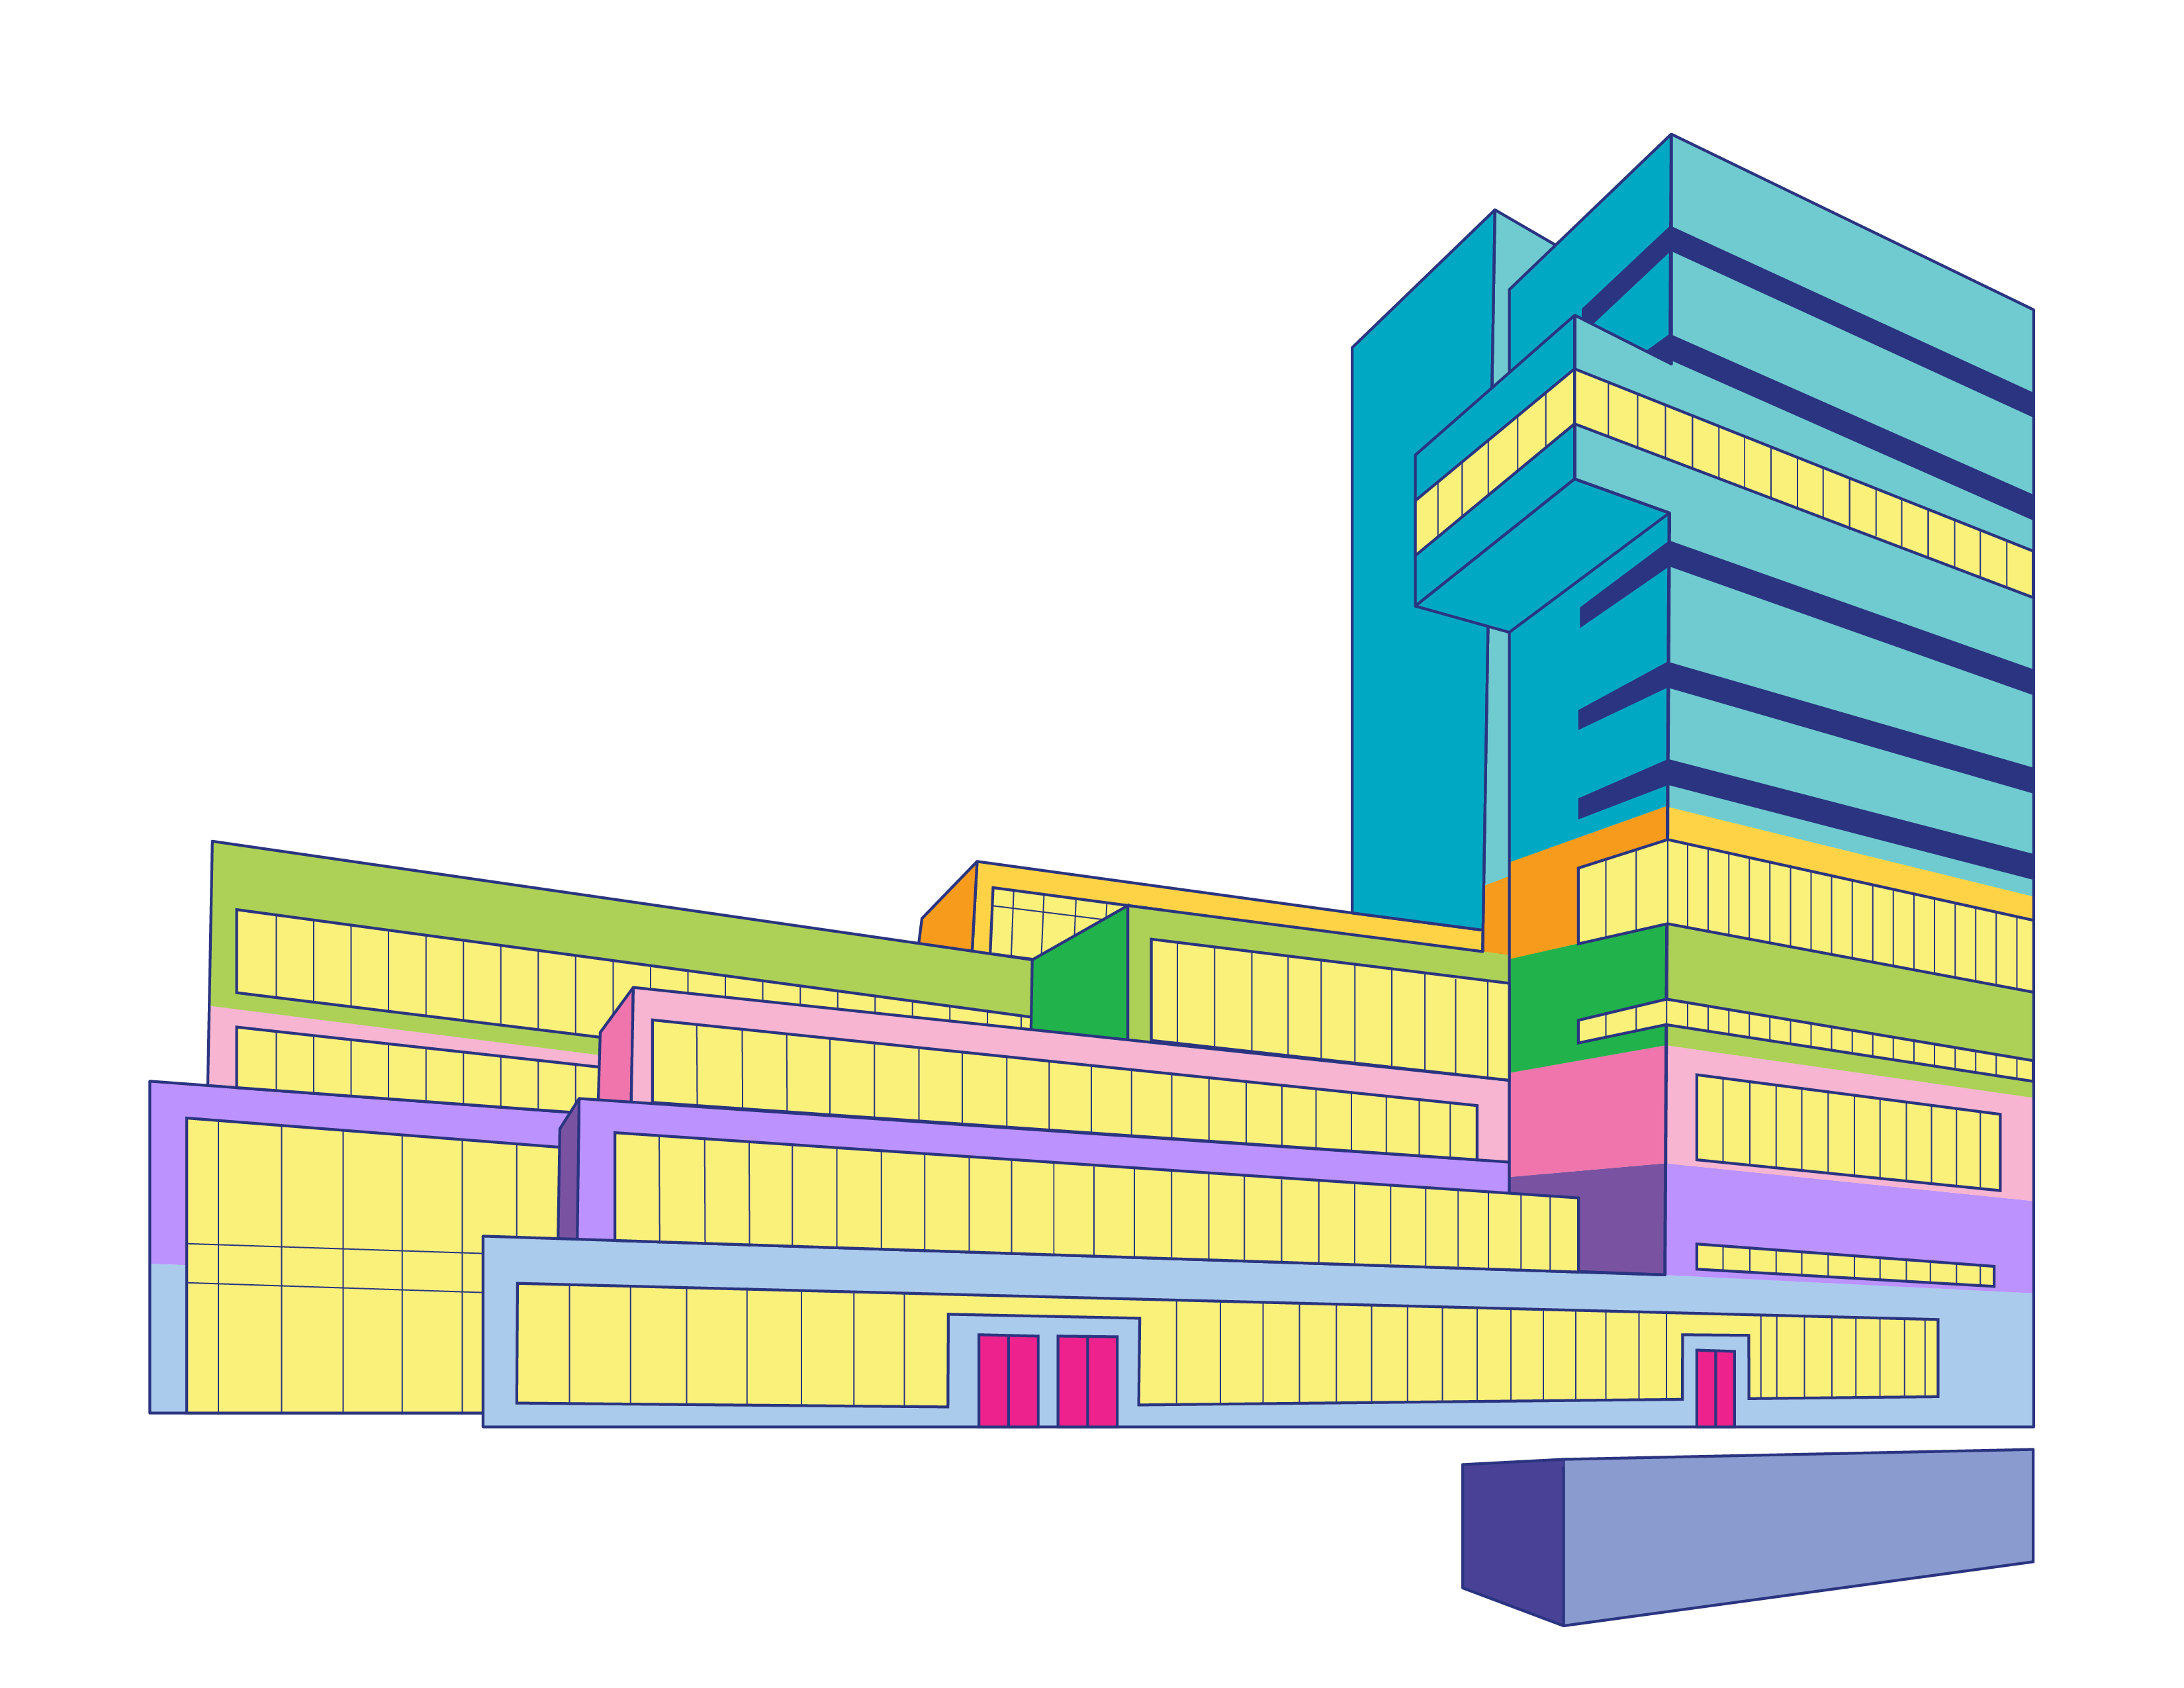 Illustration of Milstein Center with different floors shown in different bright colors